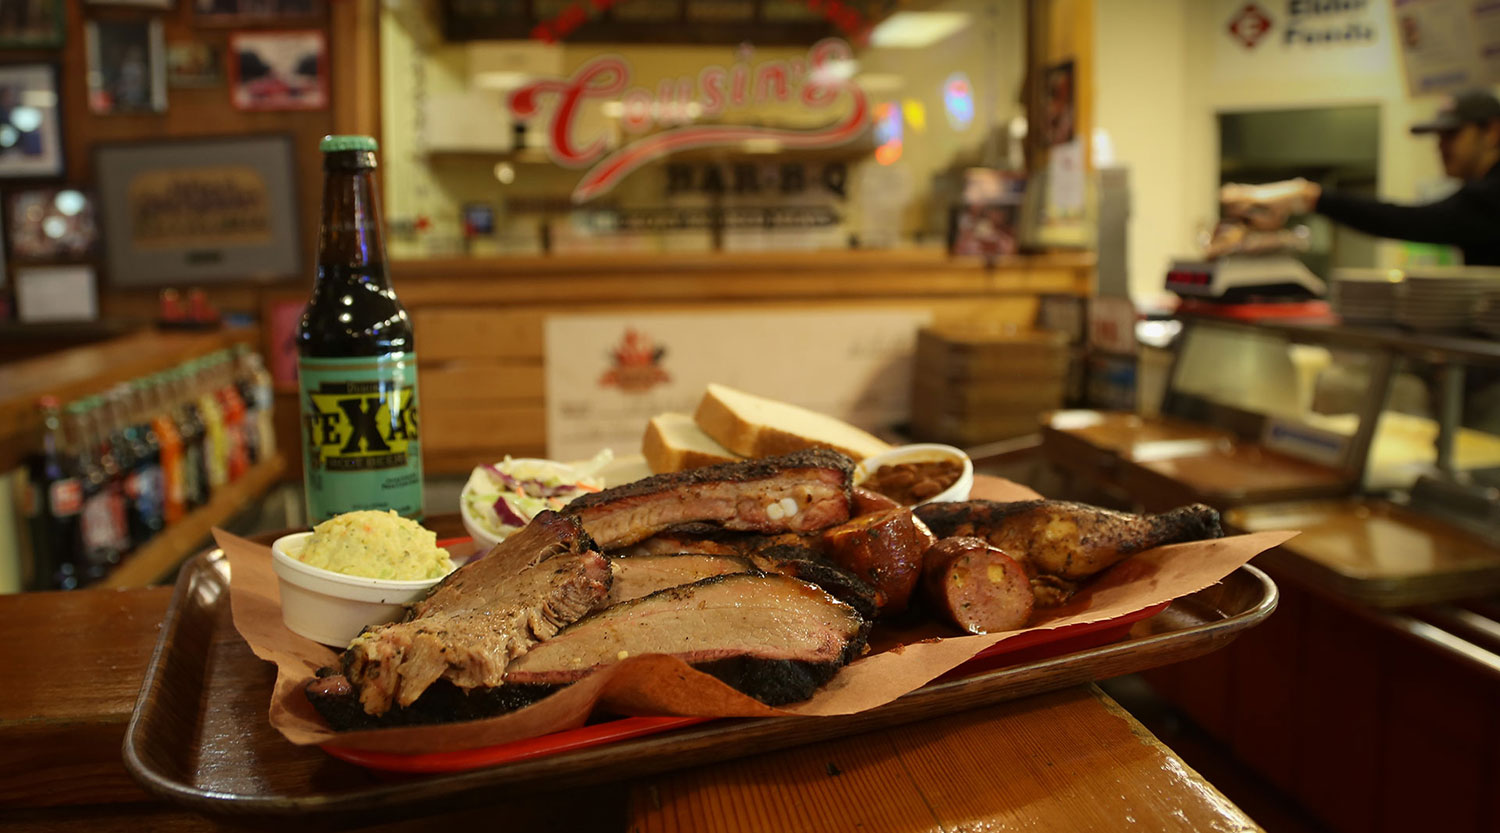 Cousin's Forth Worth Bar-B-Q Restaurants have been serving real slow smoke Texas BBBQ since 1983